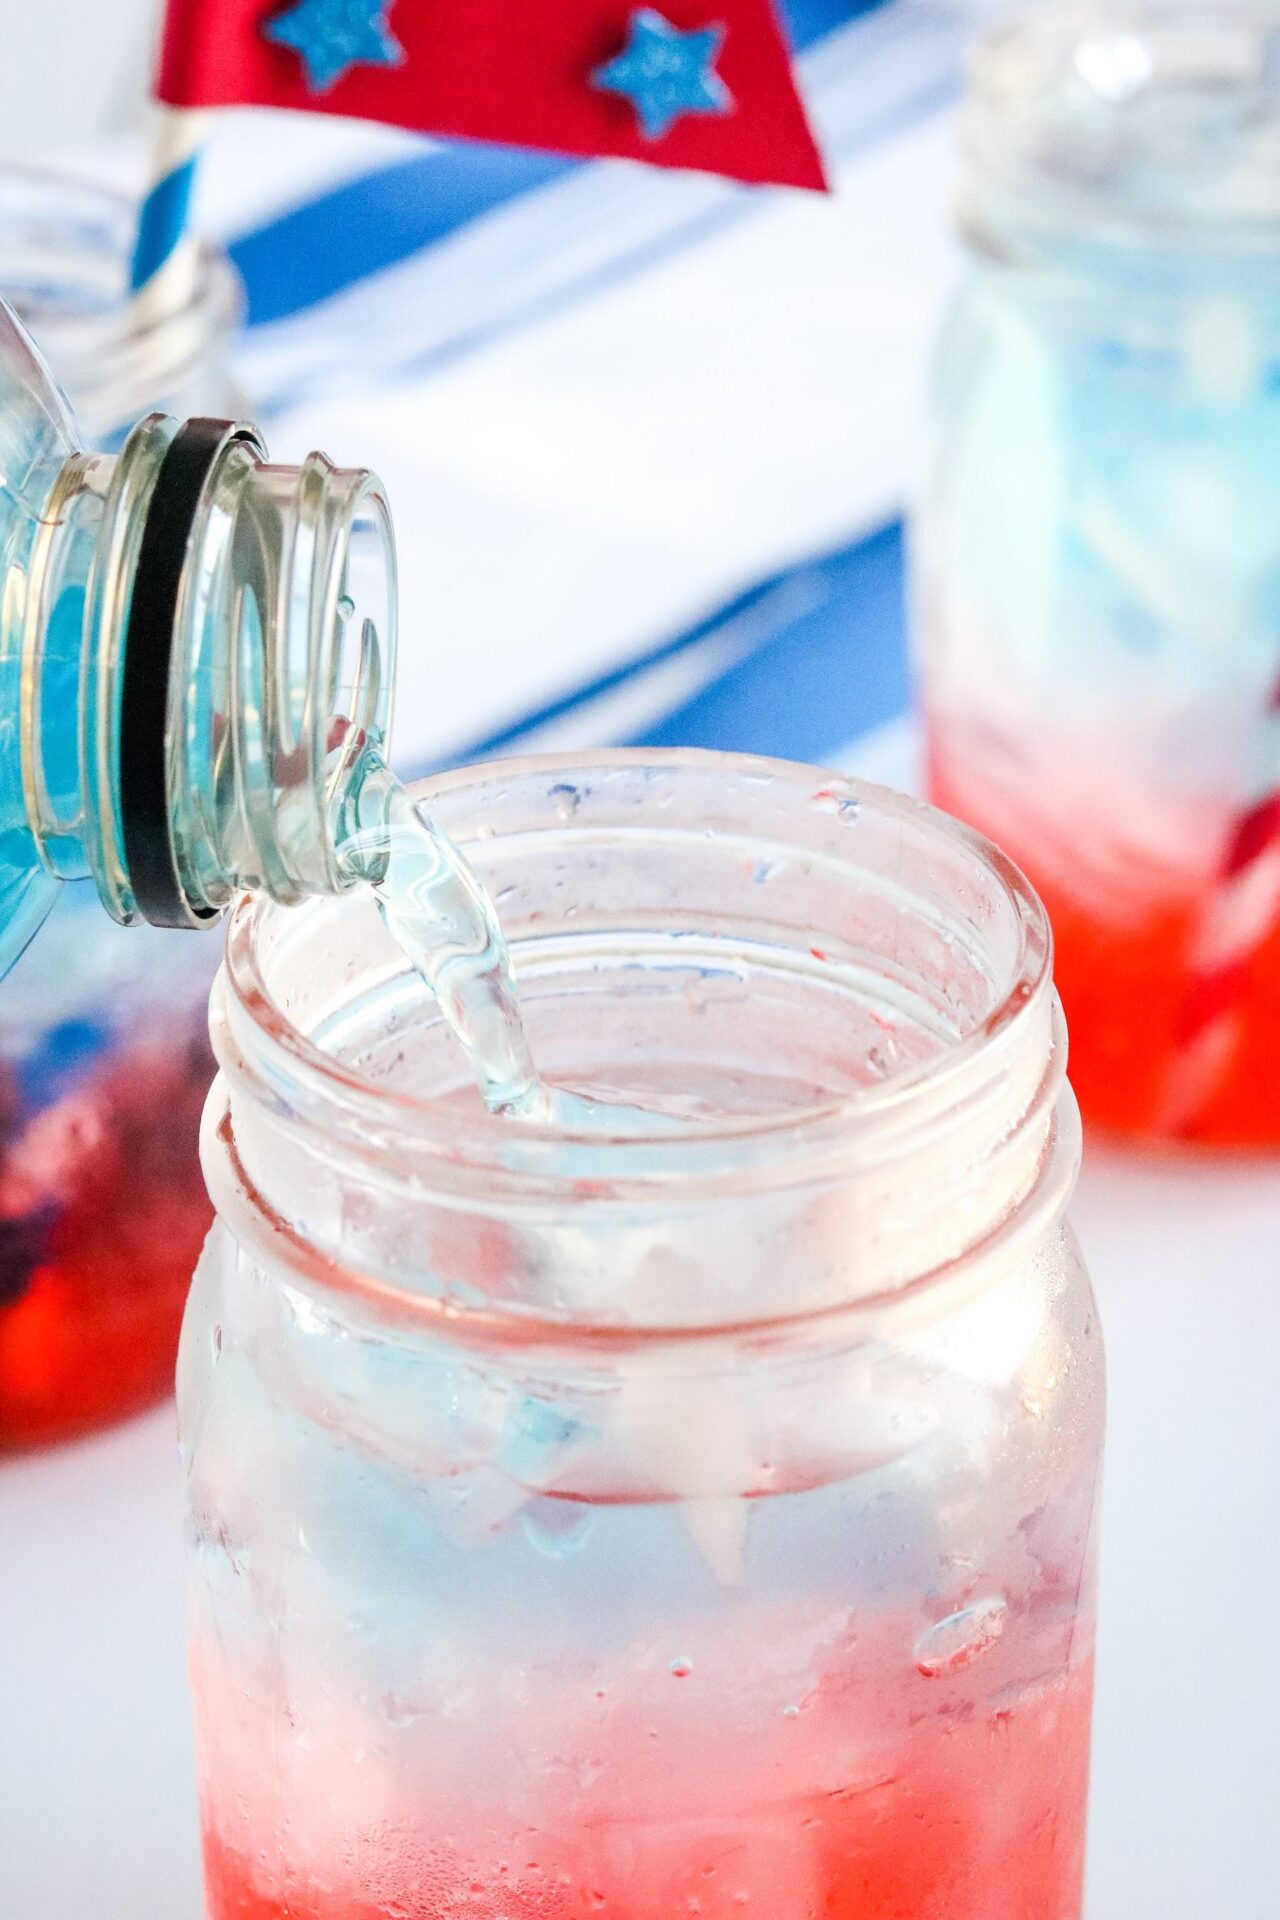 Looking for a kid-friendly fourth of July drink? Meet the 4th of July Layered Sparkling drink!! Plus check out the 4th of July Craft Straws to make as well!